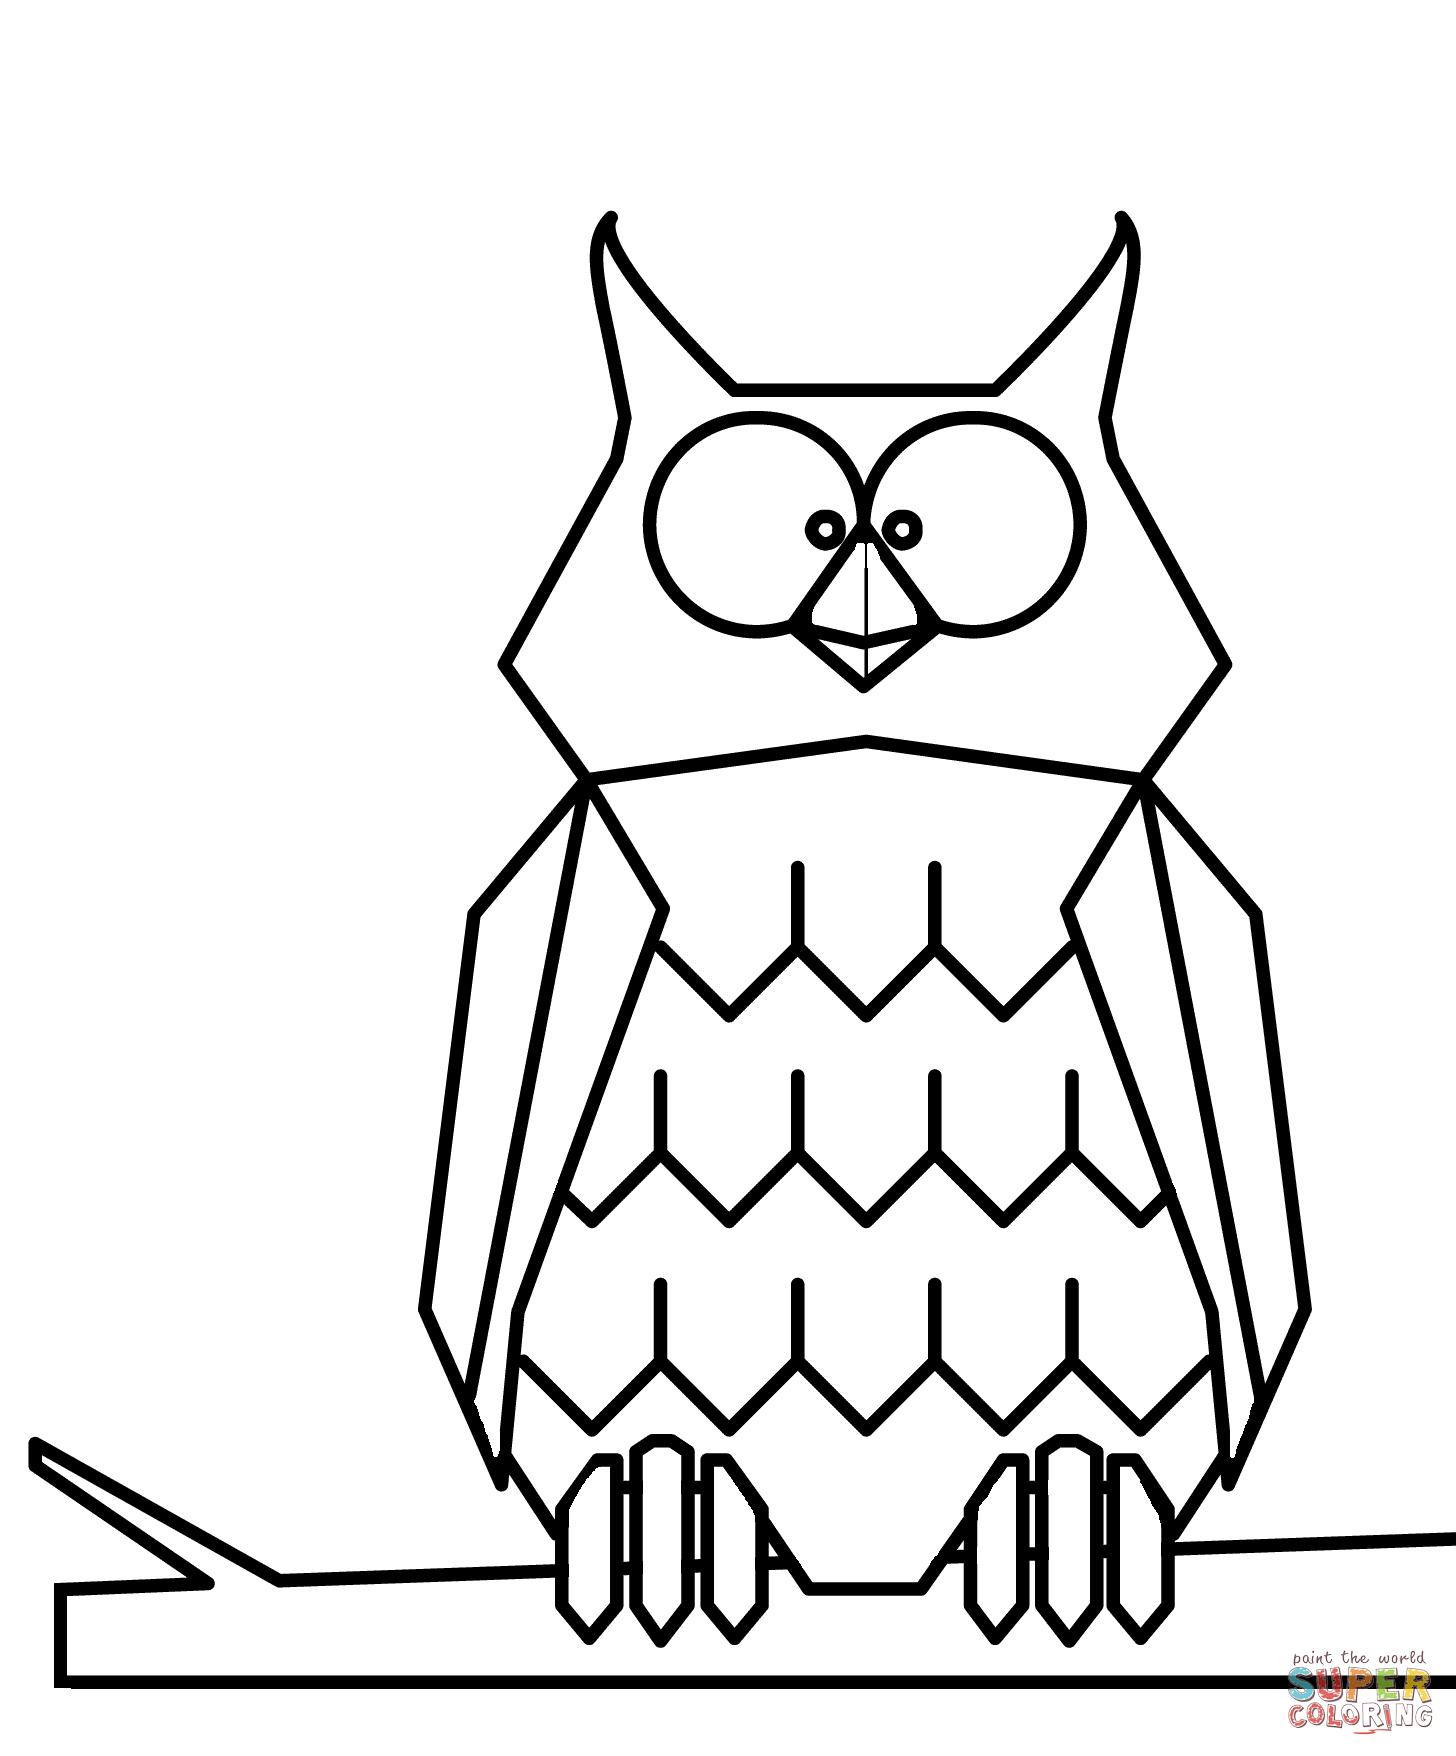 Cartoon Owl coloring page | Free Printable Coloring Pages